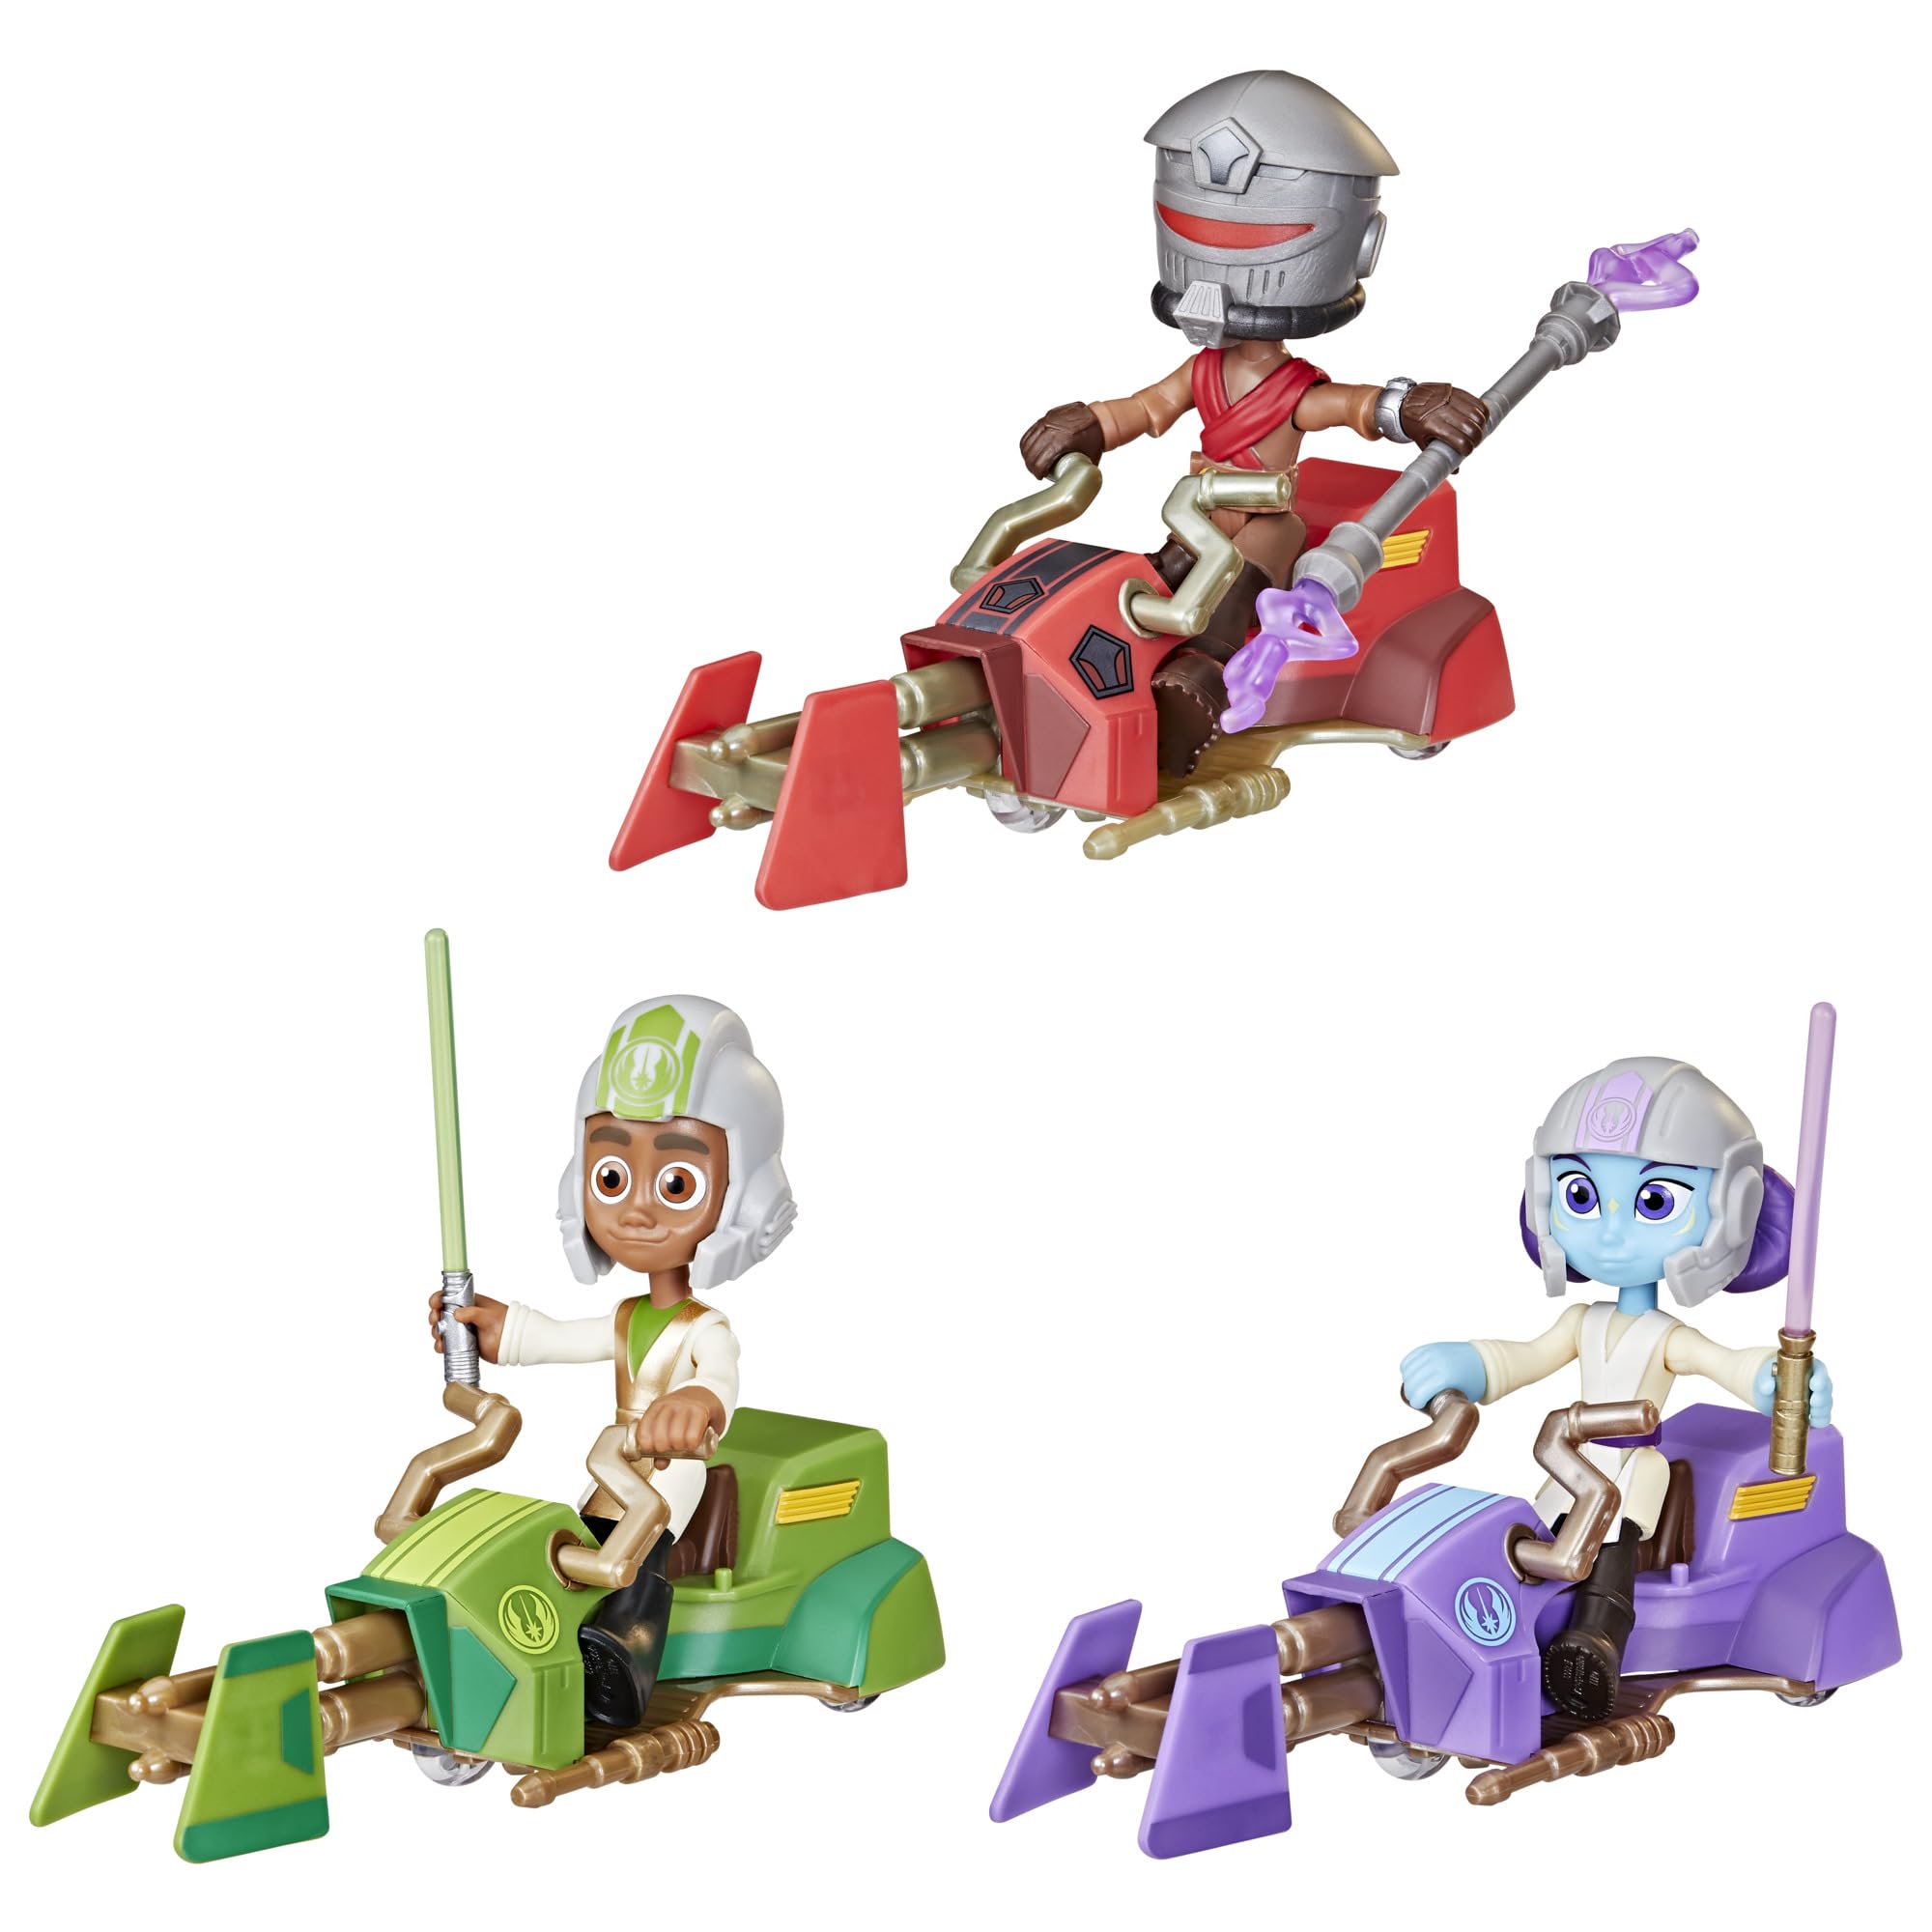 STAR WARS Young Jedi Adventures Speeder Adventure Pack, 3-Pack Action Figures & Vehicles, 4-Inch Scale Preschool Toys for 3 Year Old Boys & Girls (Amazon Exclusive)